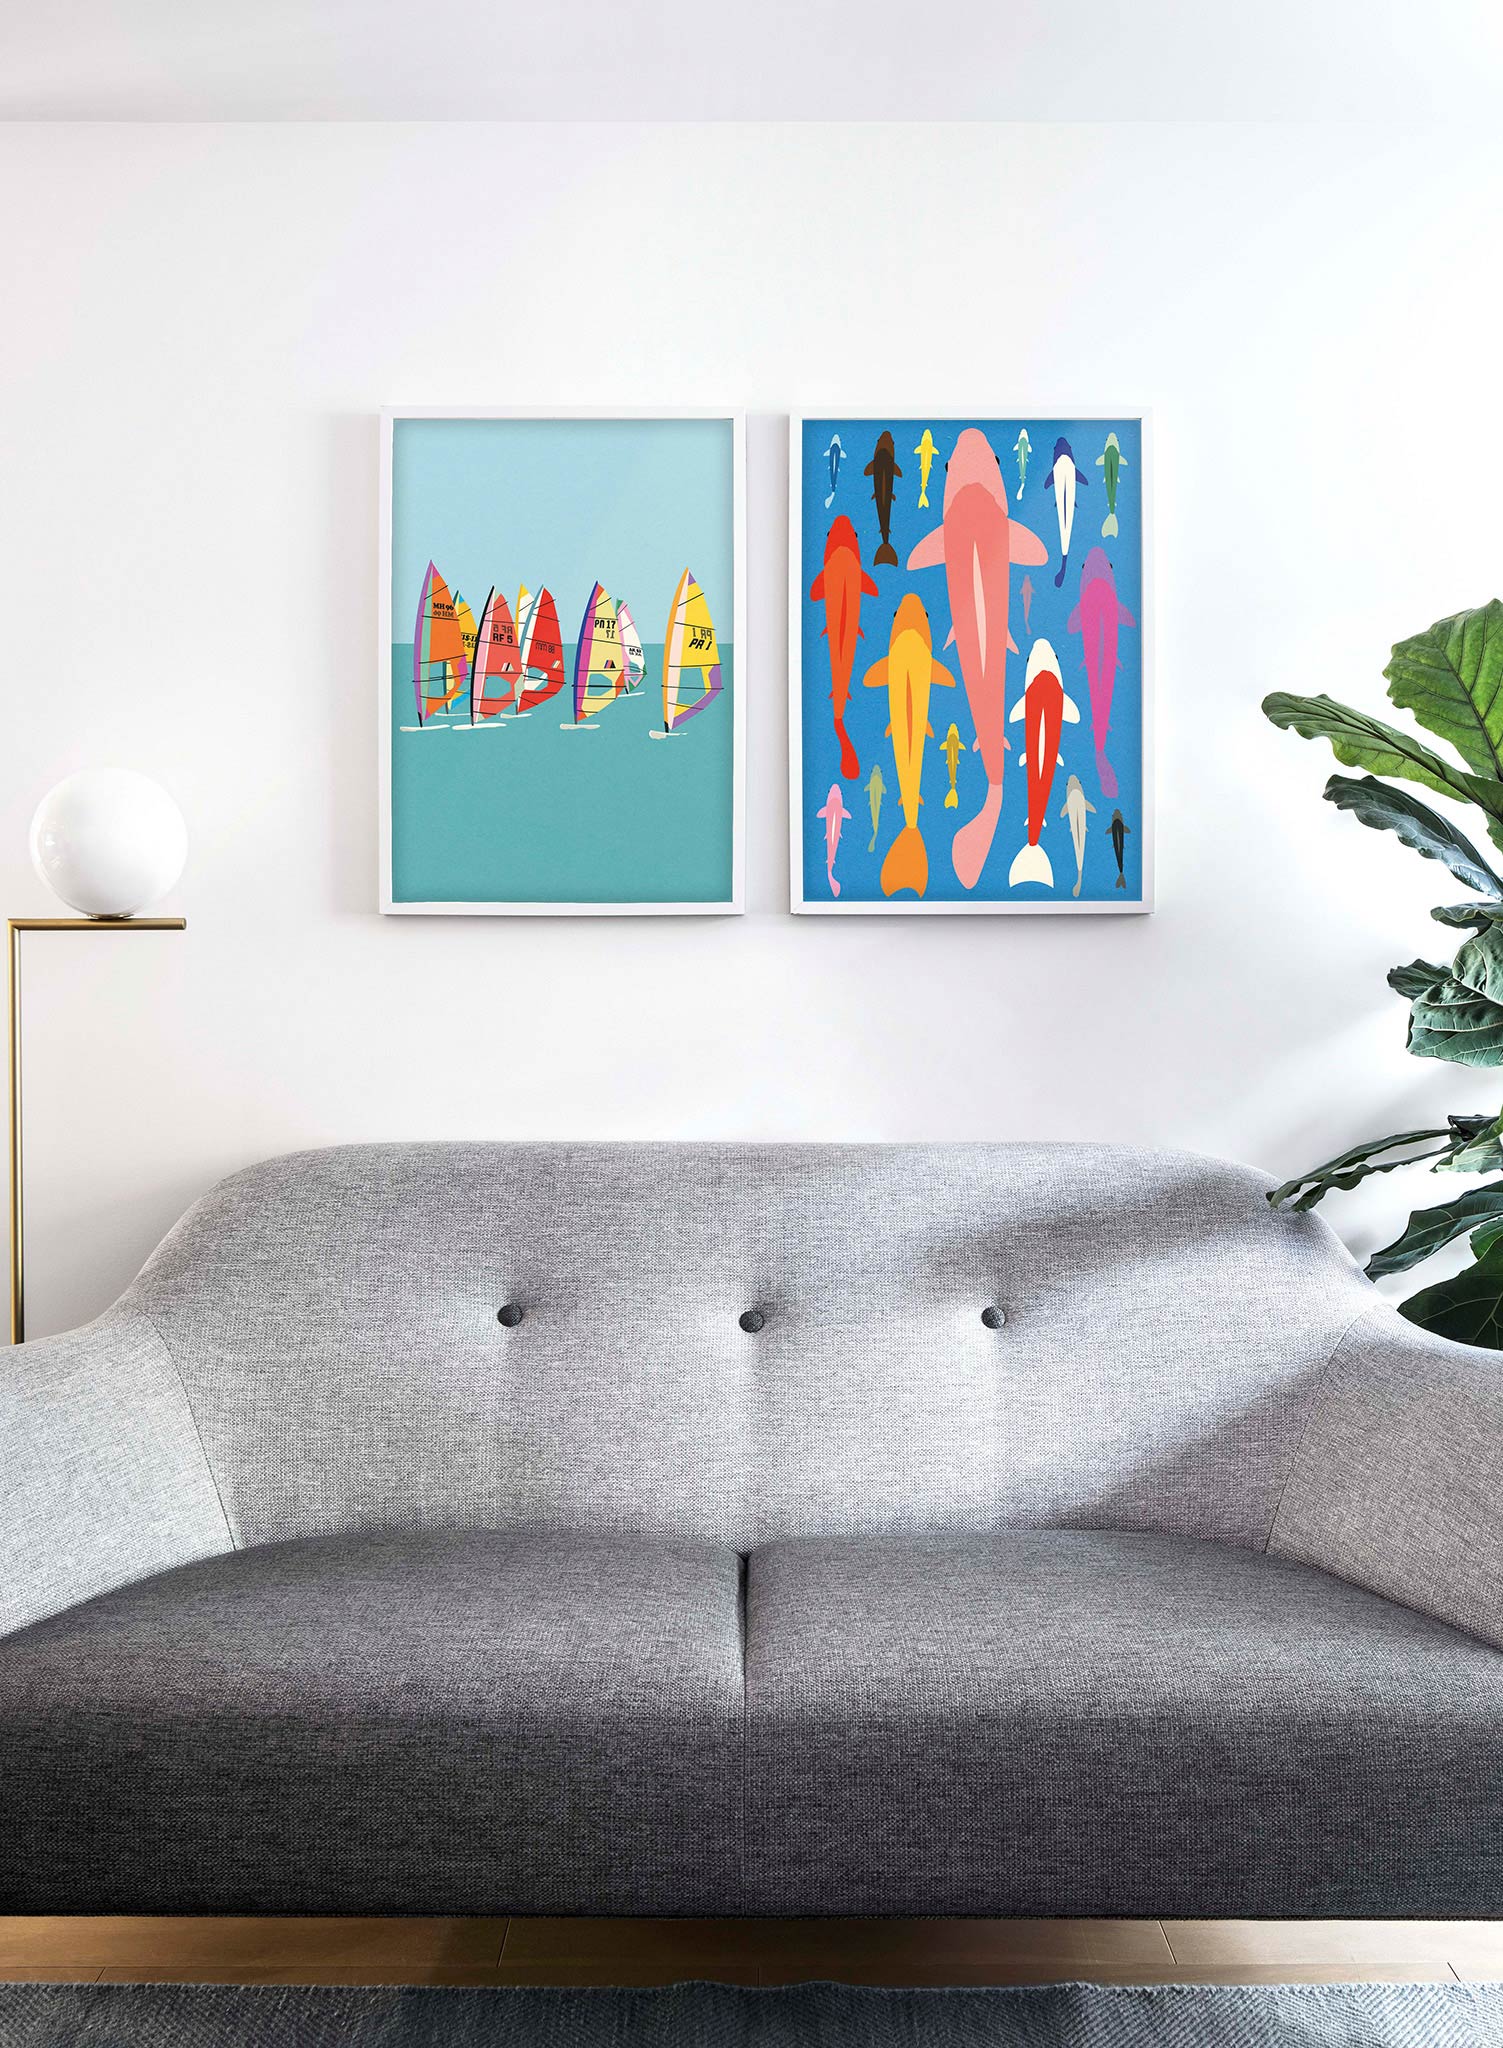 Minimalist pop art paper illustration by German artist Rosi Feist with group of colourful Koi fish - Lifestyle Duo - Living Room